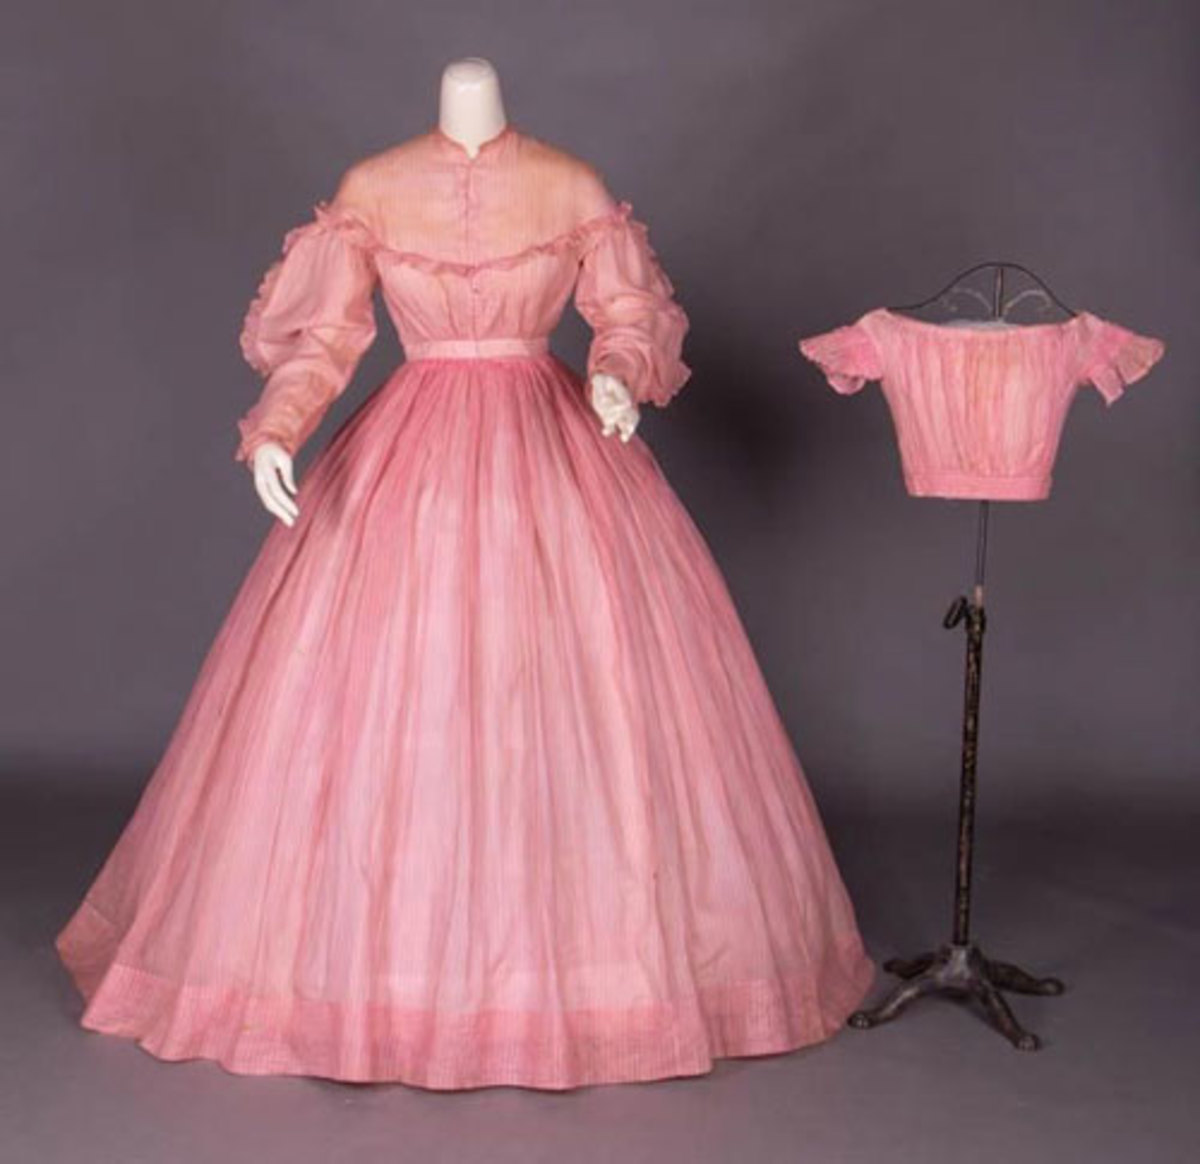 How adorable is this? A day dress for mother and a matching bodice for daughter, circa 1860, in leno weave pink and white cotton, with fine woven vertical stripes. Estimate: $500-$800.